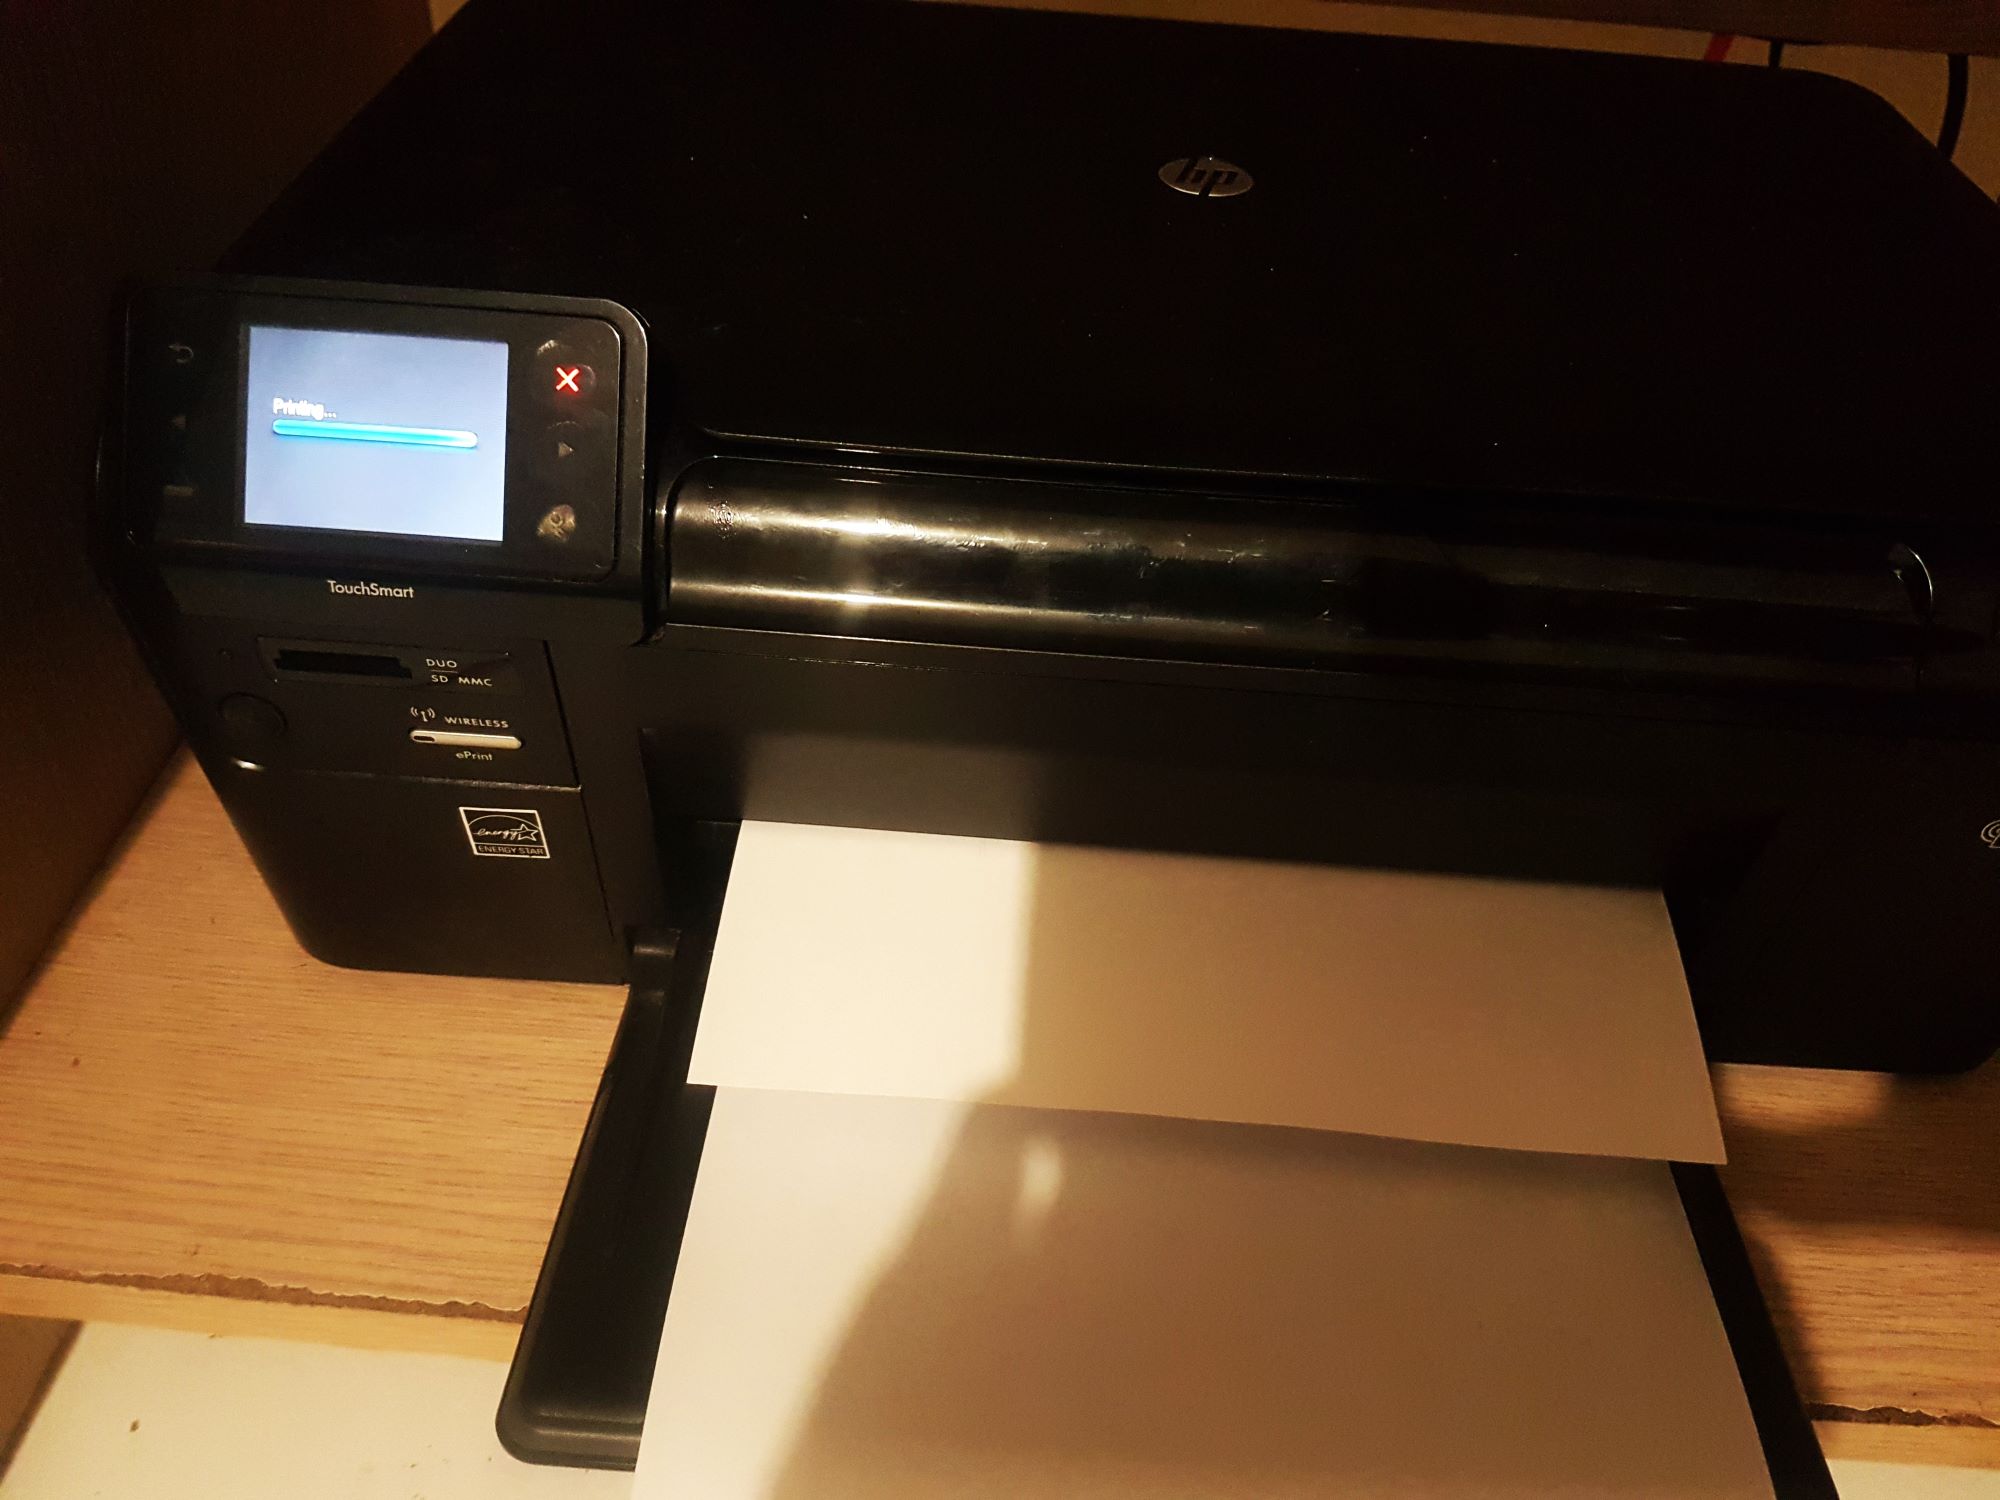 What Does The Red “X” Mean On My HP Printer